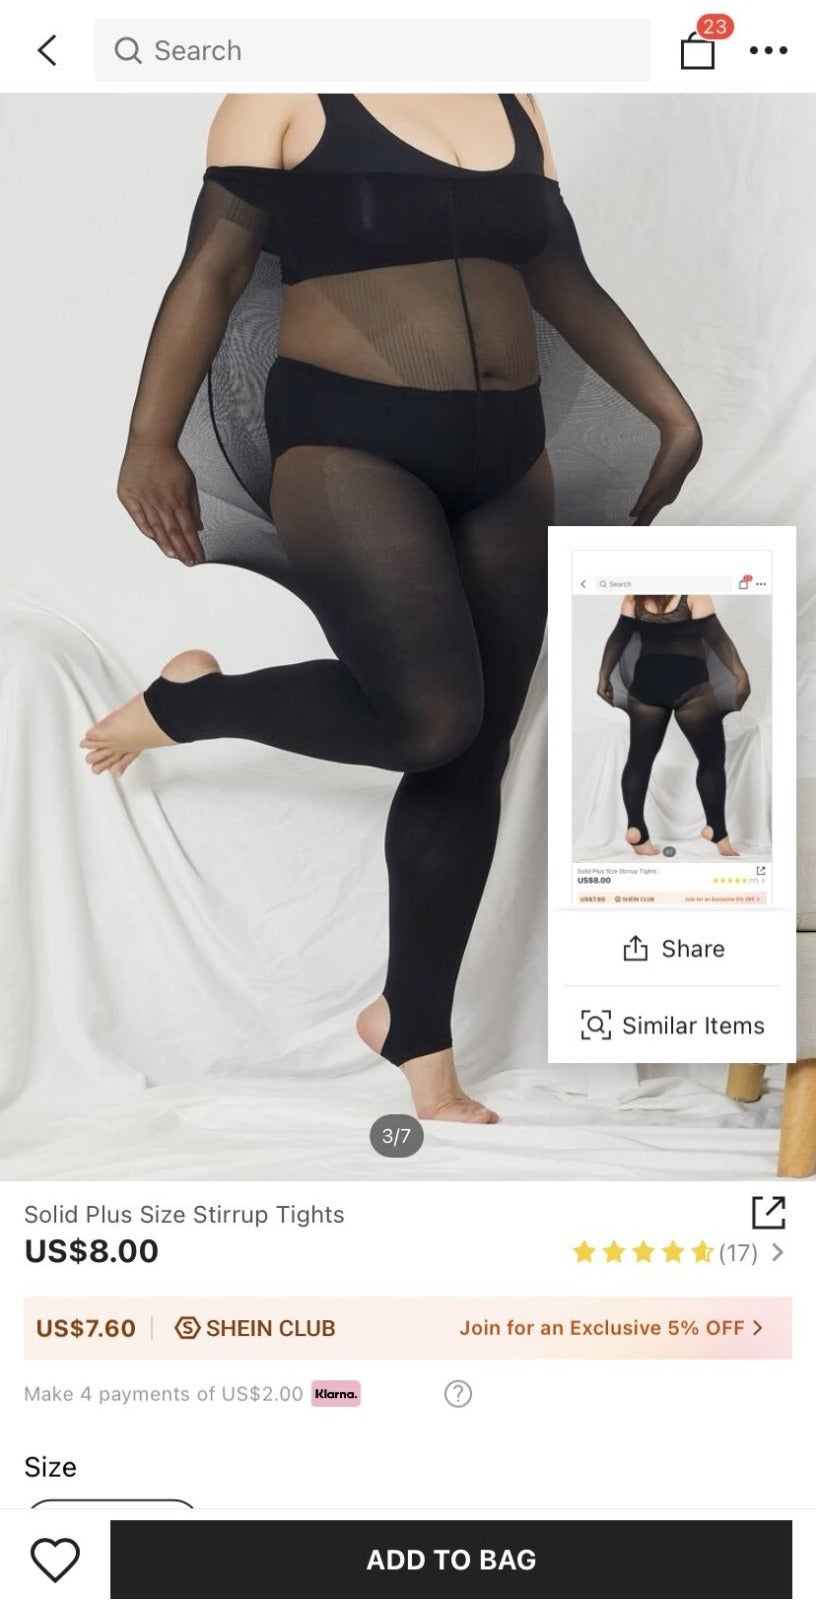 Shein slammed for model posing with water dispenser to show plus-size  tights-Telangana Today